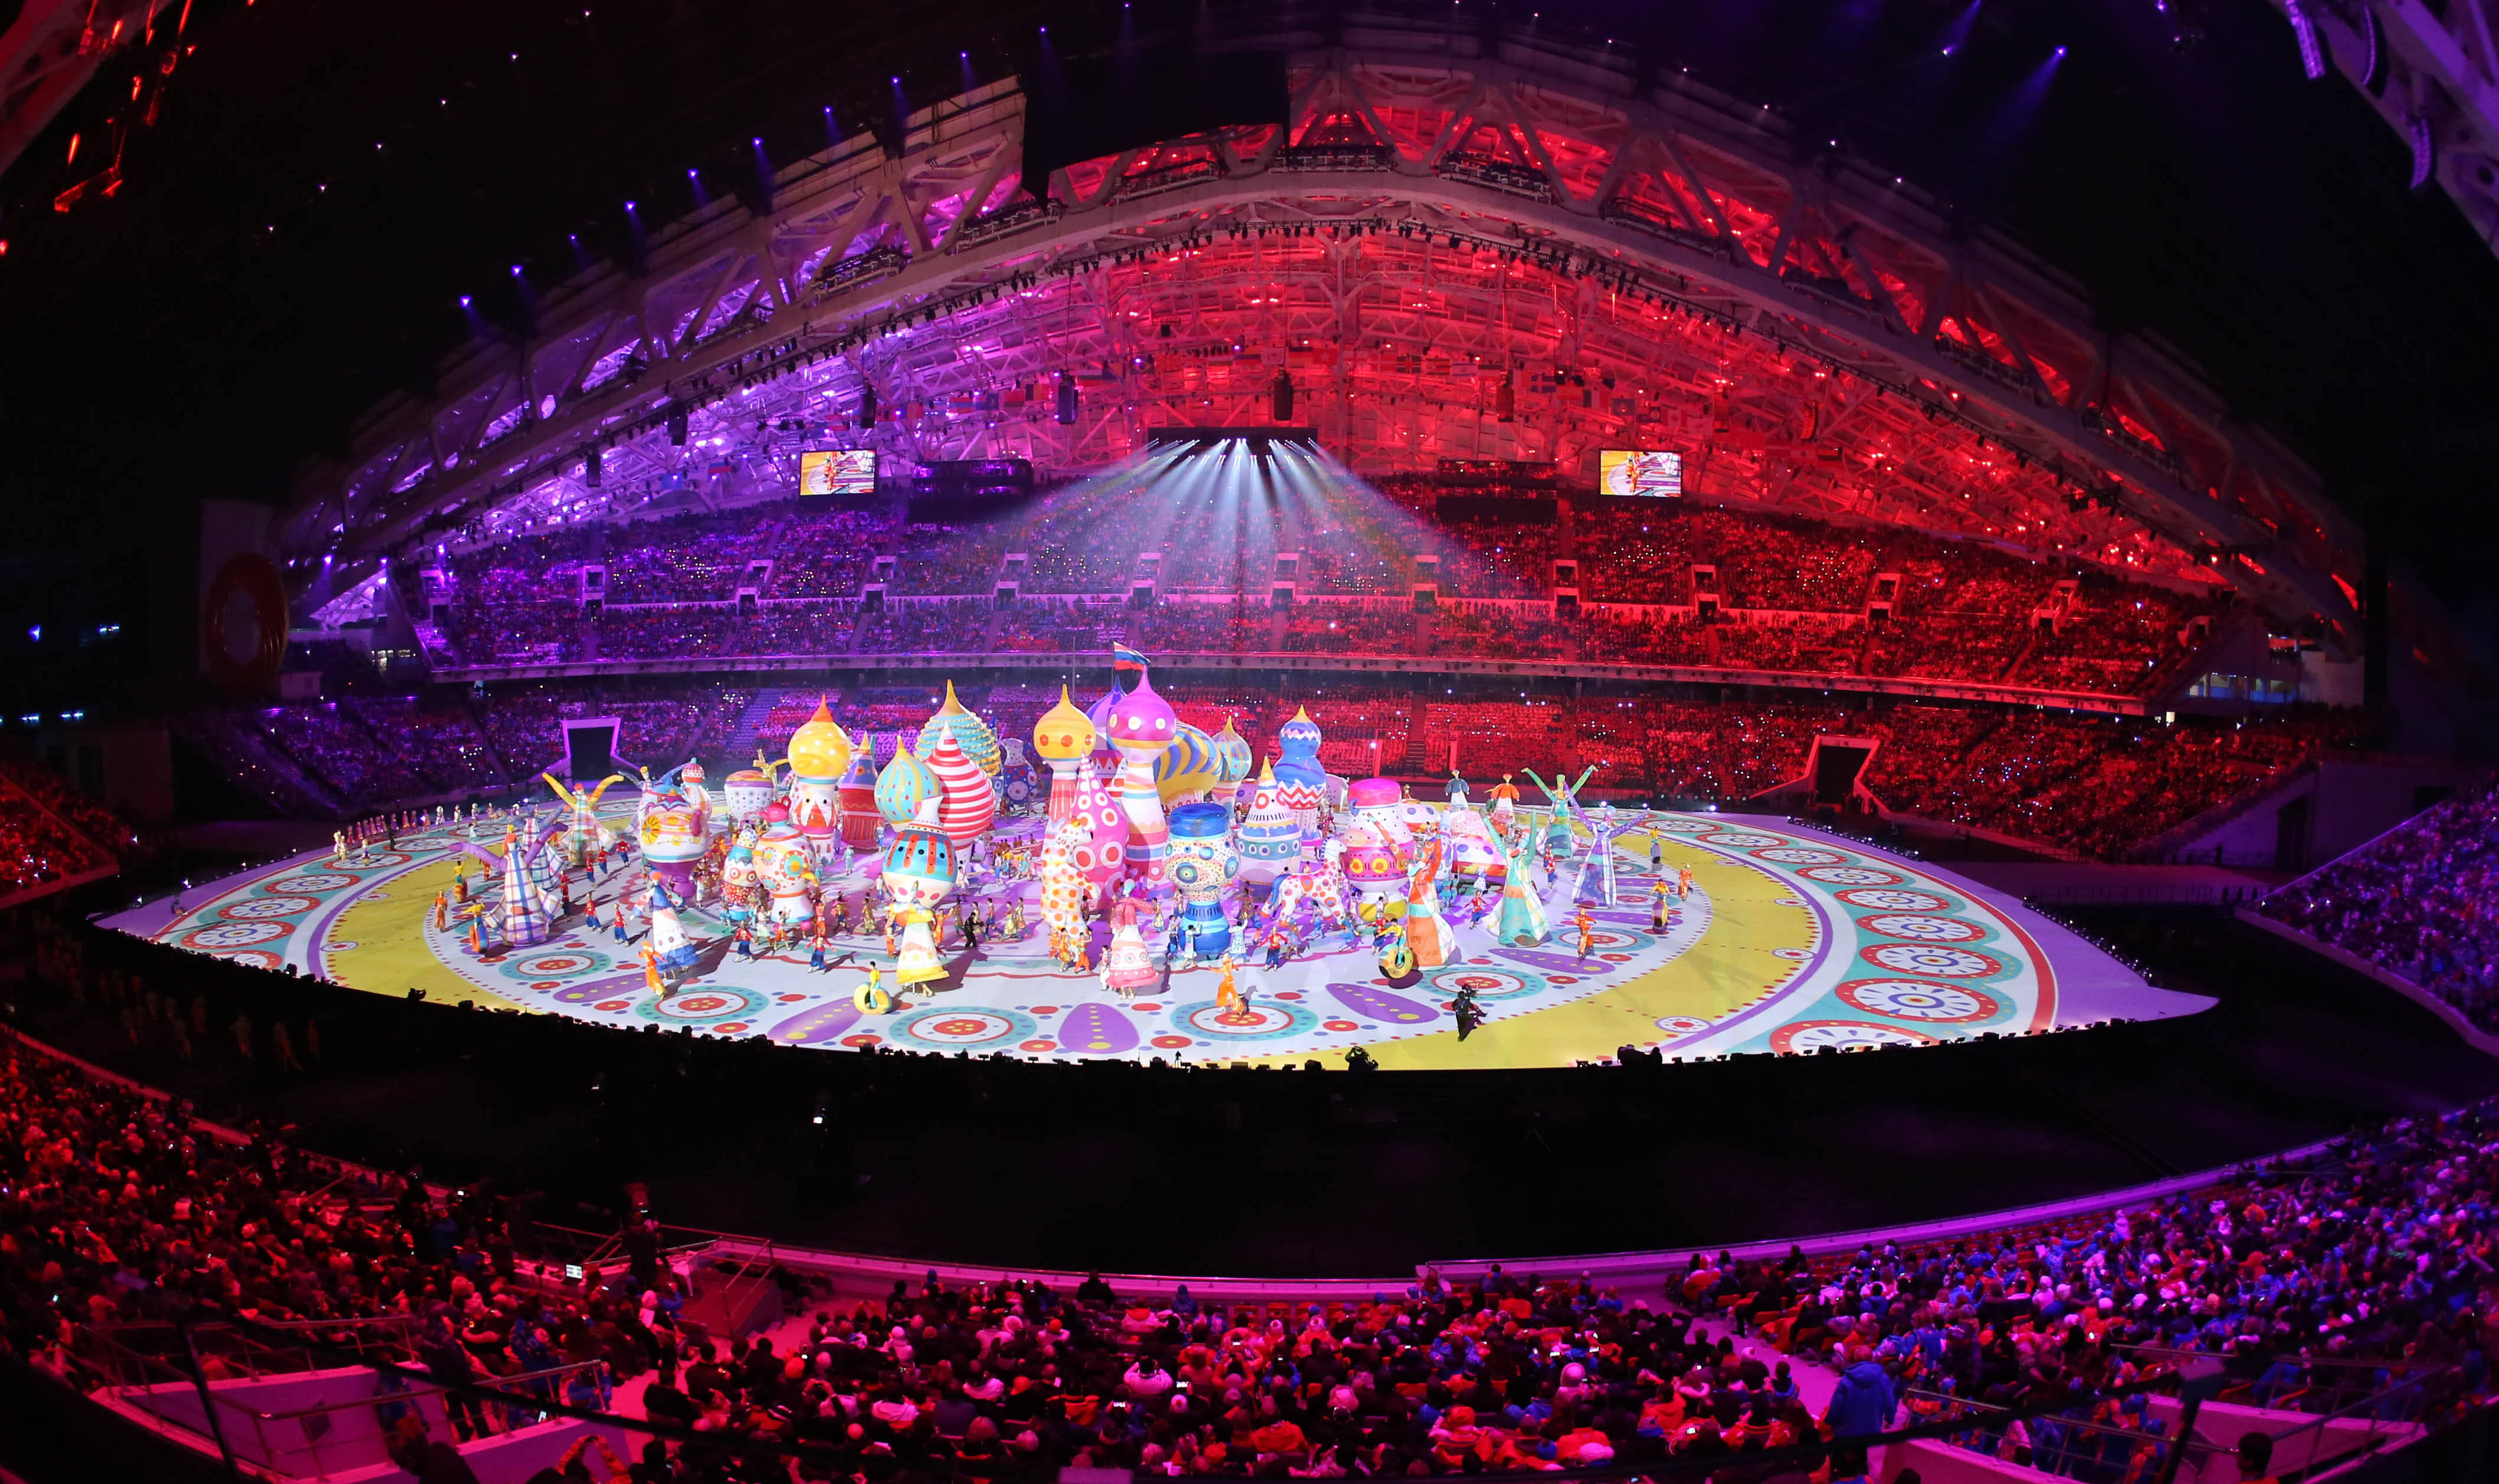  A performance during the opening ceremony for the 22nd Winter Olympic Games in Sochi on Friday. Photo: Xinhua